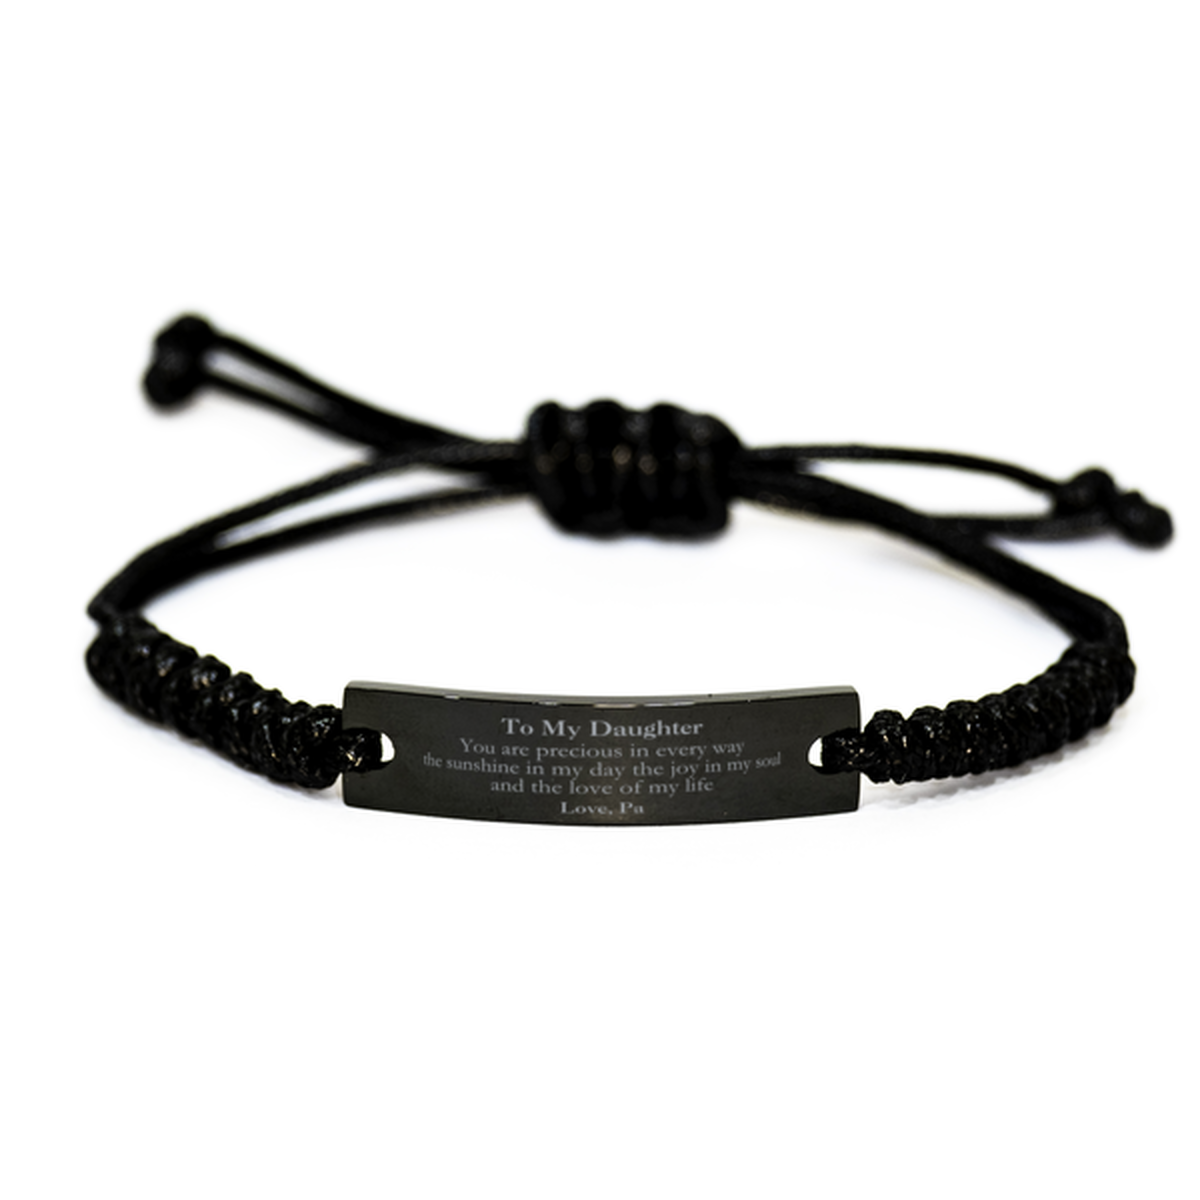 Graduation Gifts for Daughter Black Rope Bracelet Present from Pa, Christmas Daughter Birthday Gifts Daughter You are precious in every way the sunshine in my day. Love, Pa